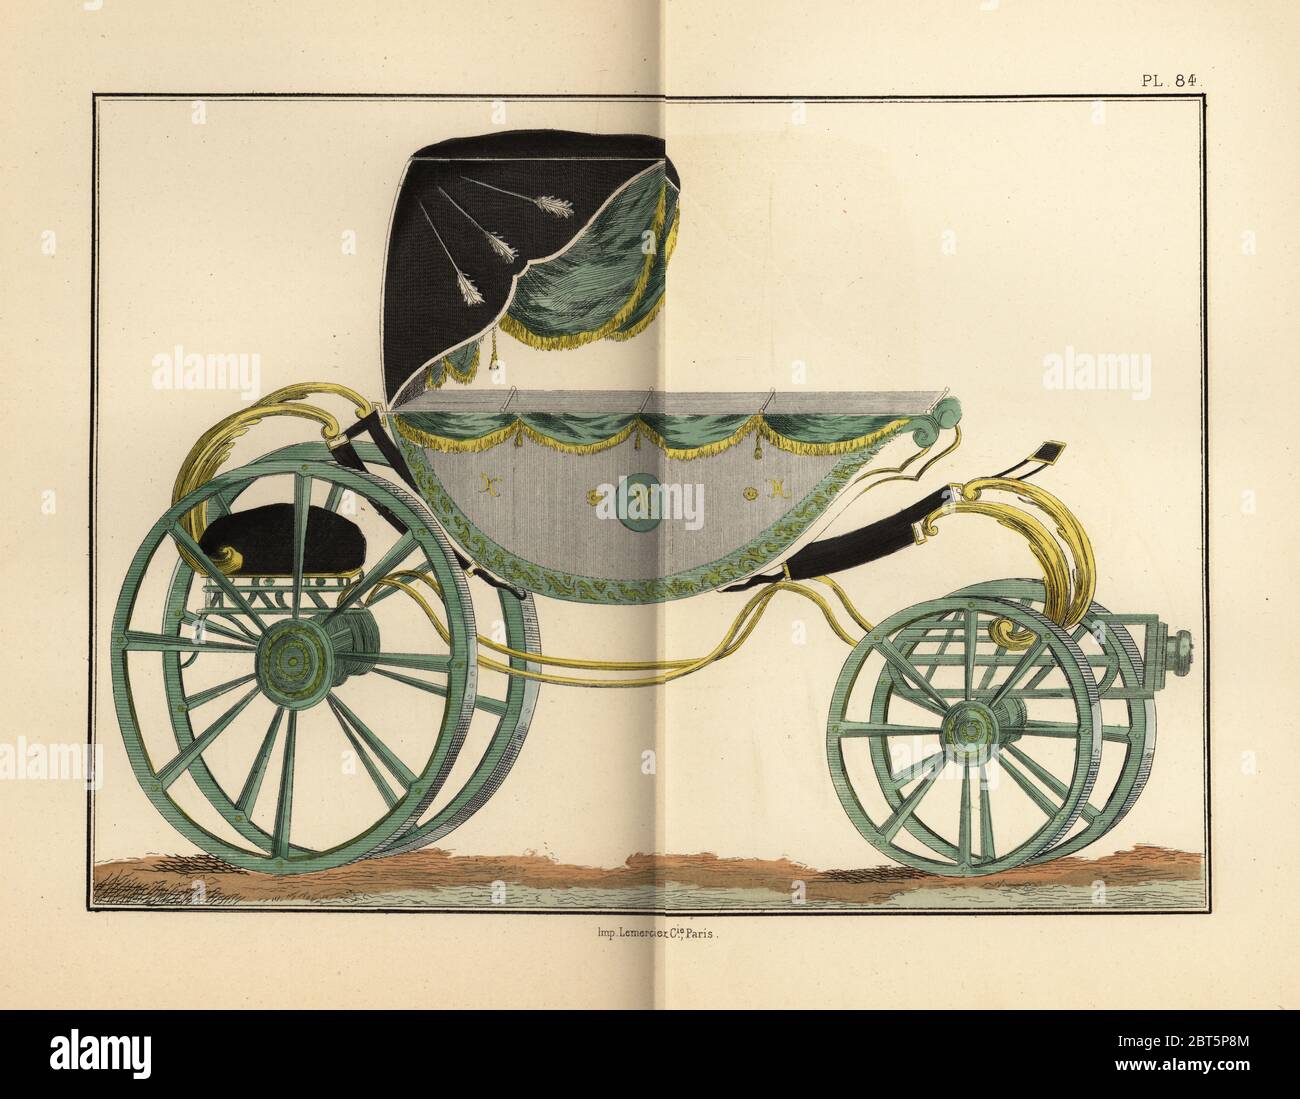 Marie Antoinettes four-wheel barouche carriage for a promenade. Caleche pour la promenade. Hand-coloured lithograph from Fashions and Customs of Marie Antoinette and her Times, by Le Comte de Reiset, Paris, 1885. The journal of Madame Eloffe, dressmaker and linen-merchant to the Queen and ladies of the court. Stock Photo